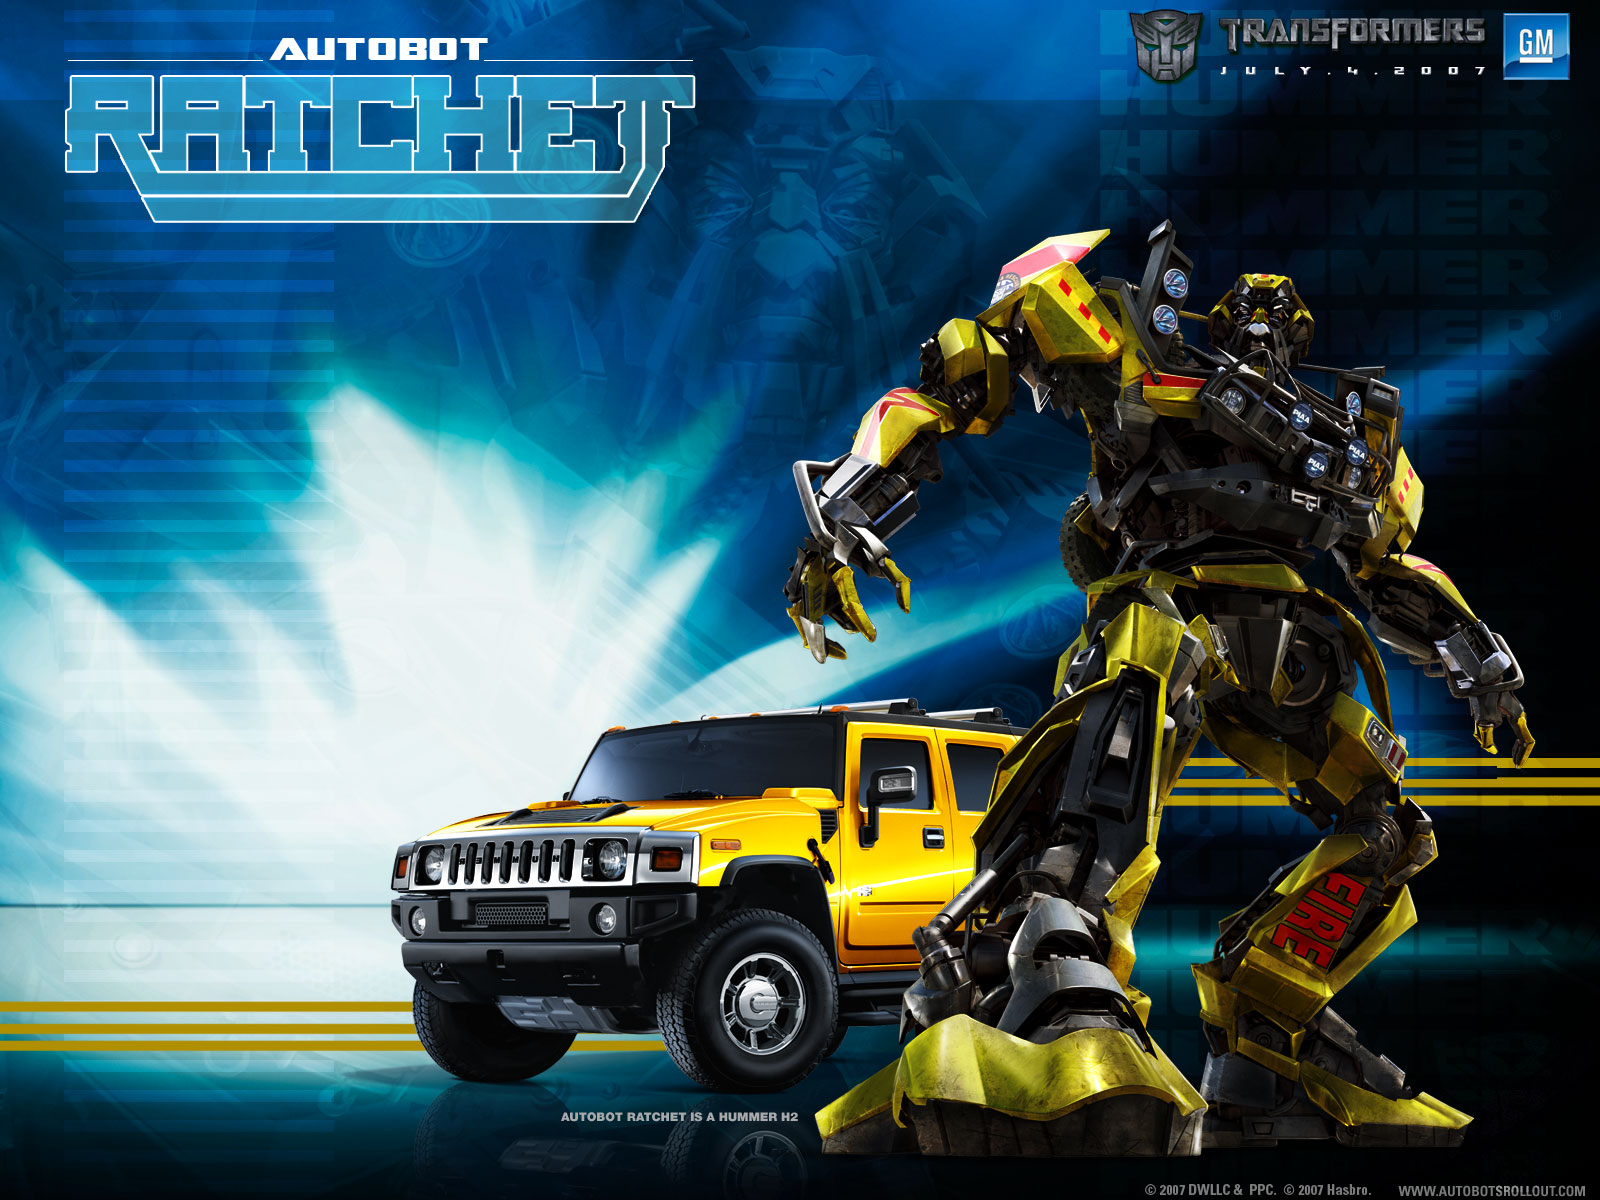 Download full size Transformers wallpaper / Movies / 1600x1200